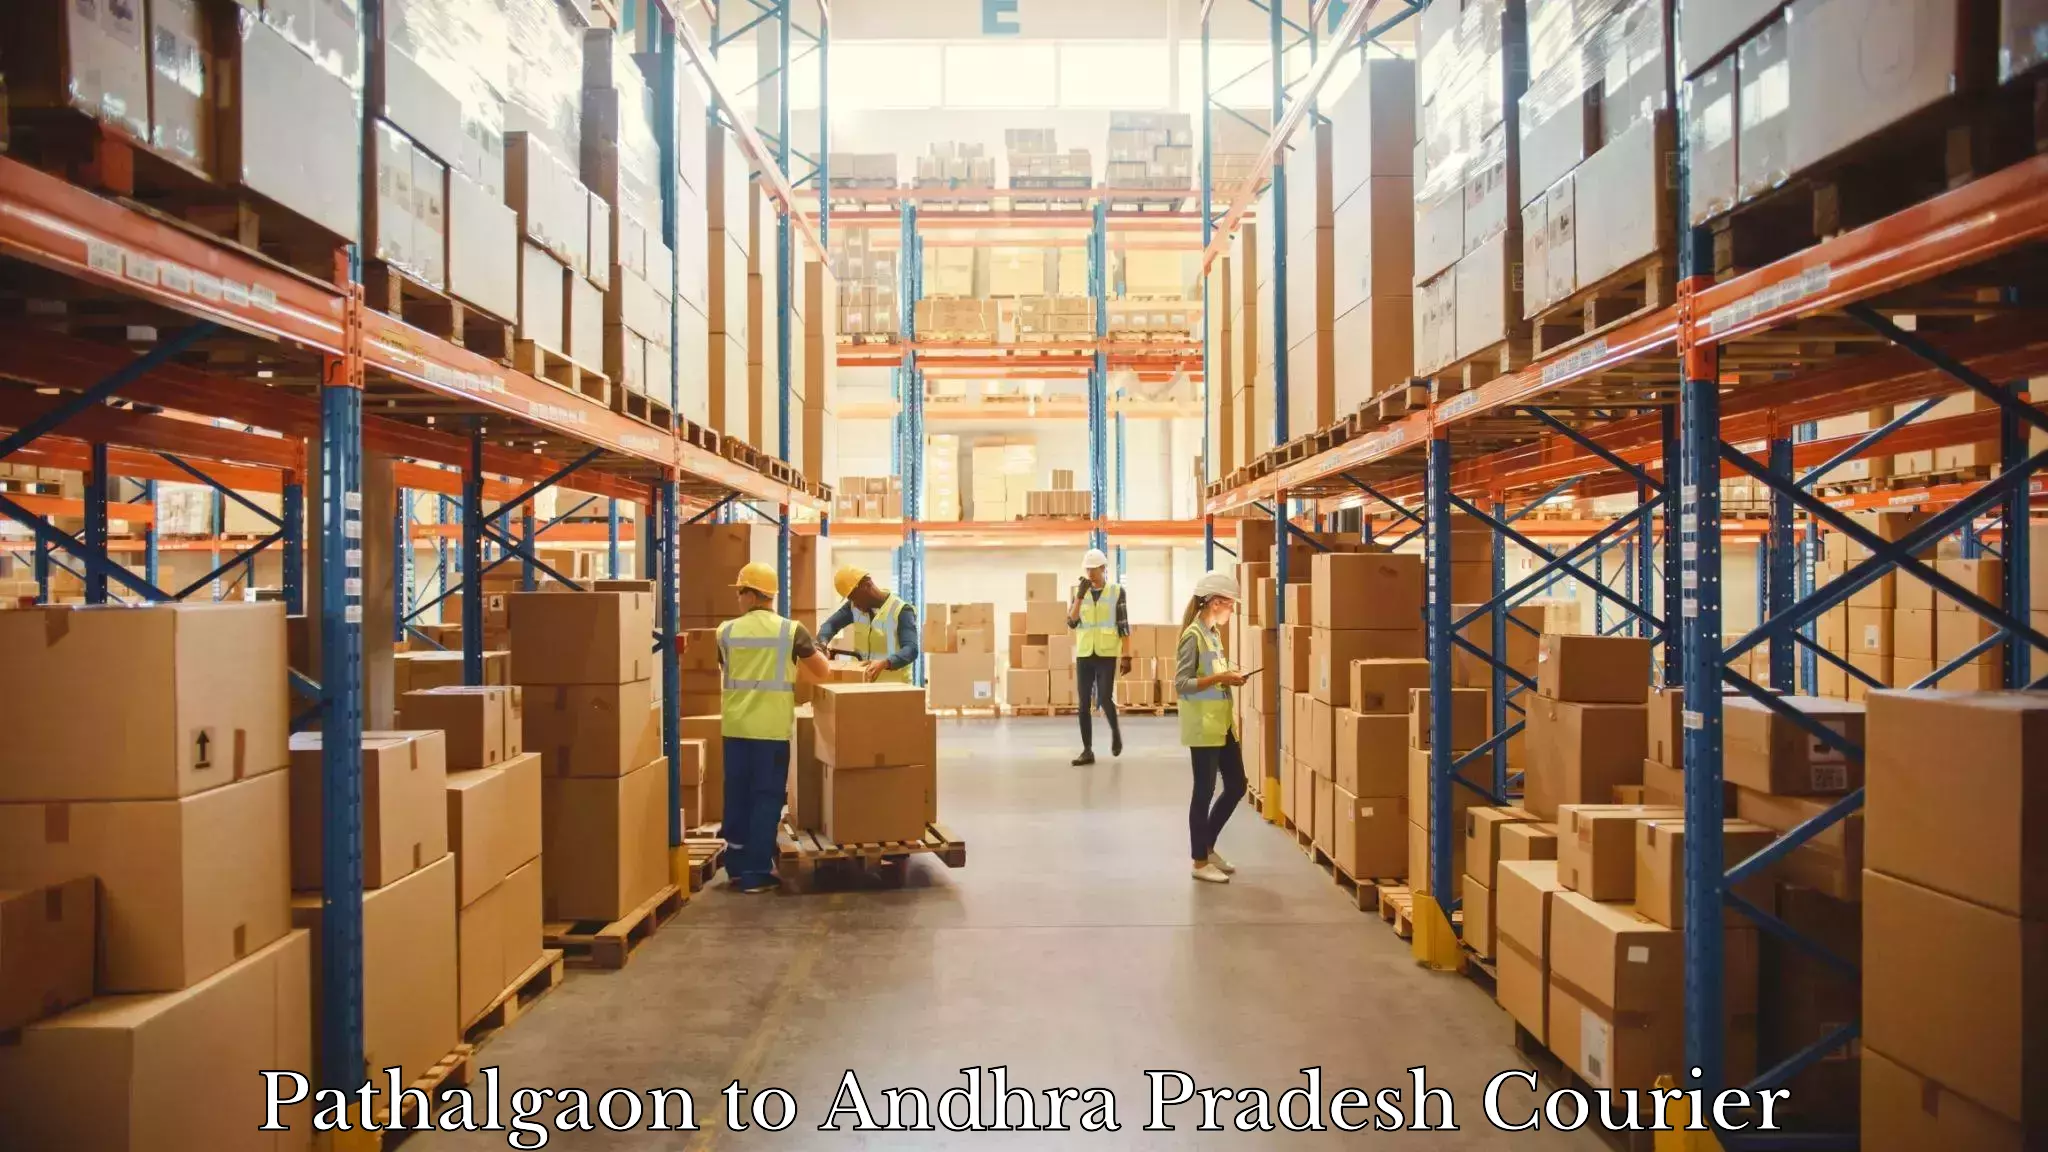 Express delivery capabilities Pathalgaon to Challapalli